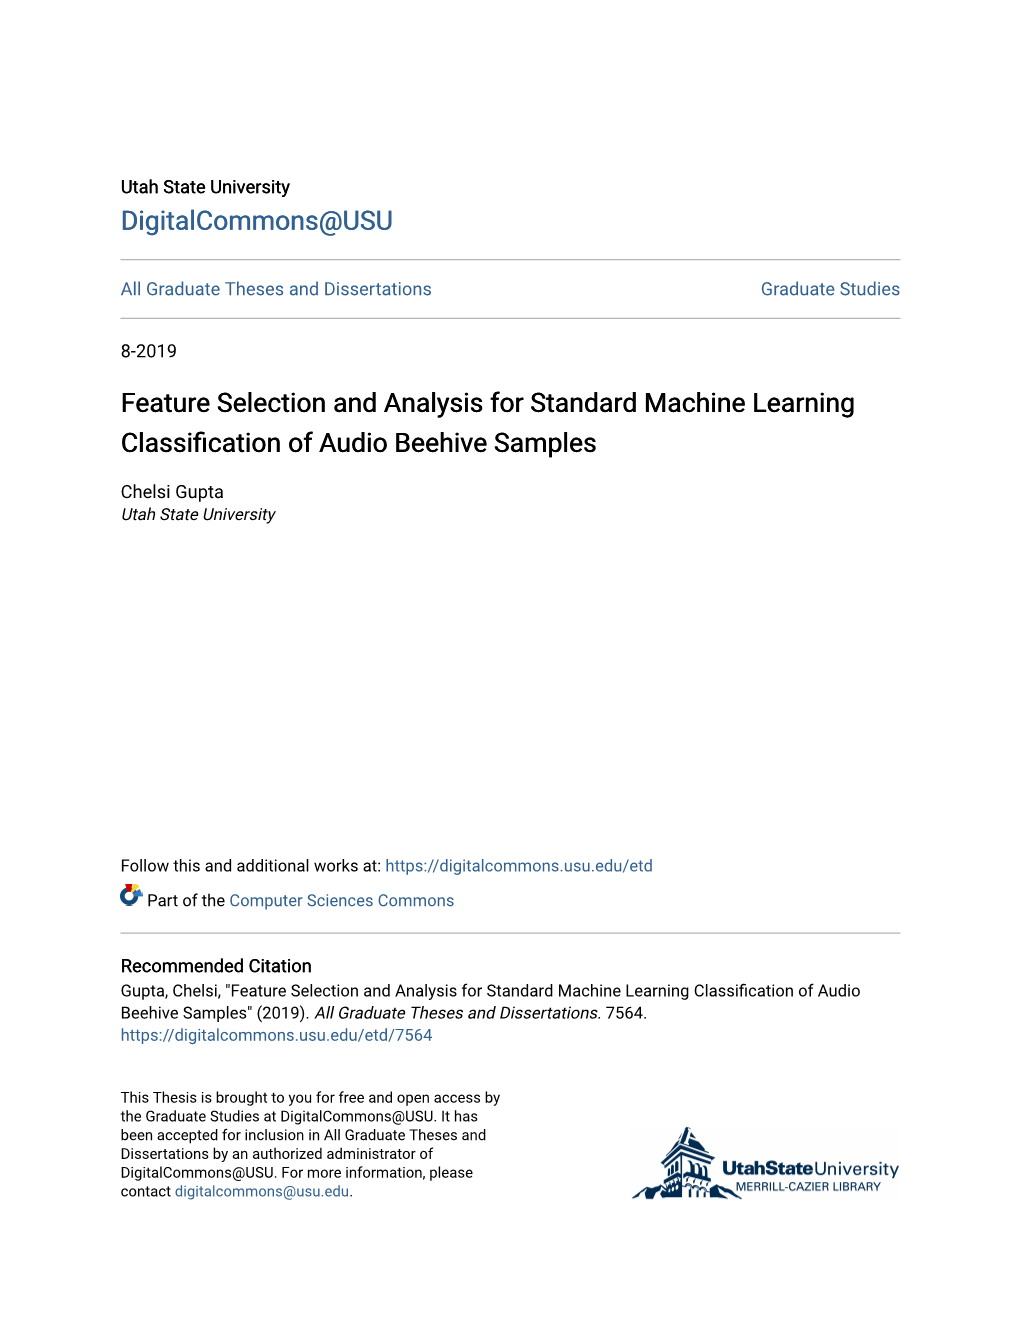 Feature Selection and Analysis for Standard Machine Learning Classification of Audio Beehive Samples